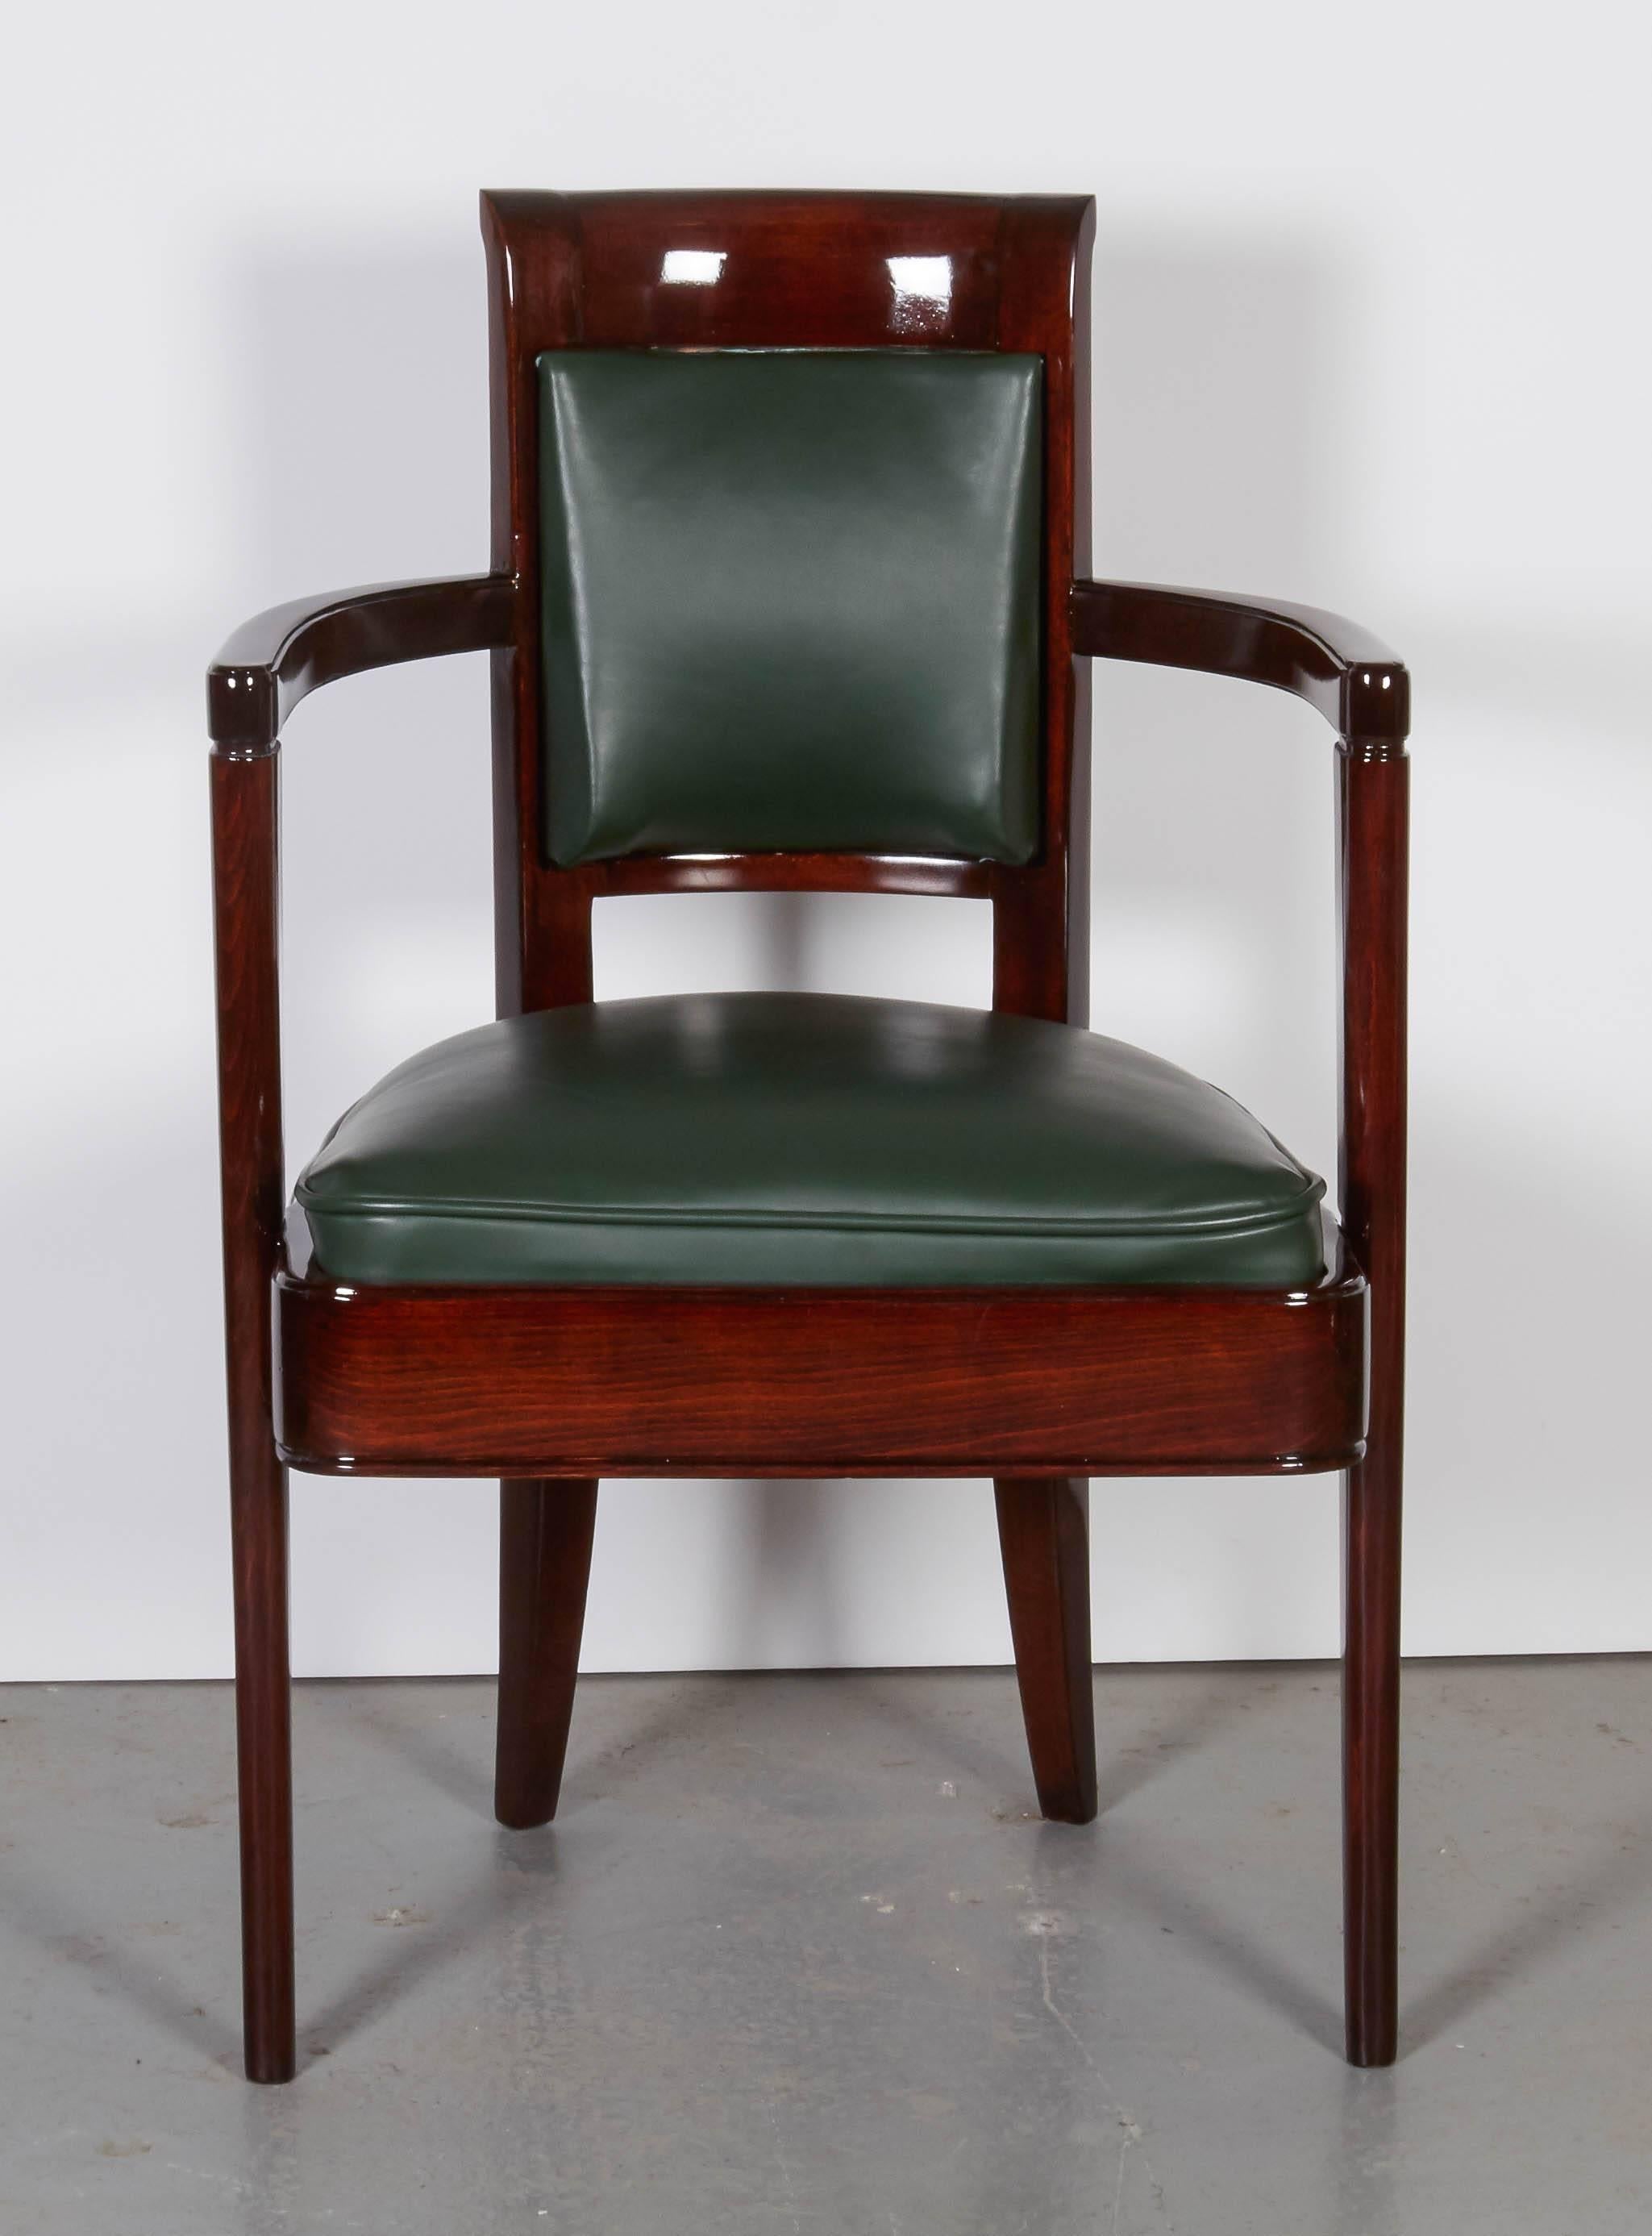 Three Pierre Patou armchairs,
colored oak wood and green leather, refinished.
Measures: Height 34.5",
width: 22",
depth: 20".